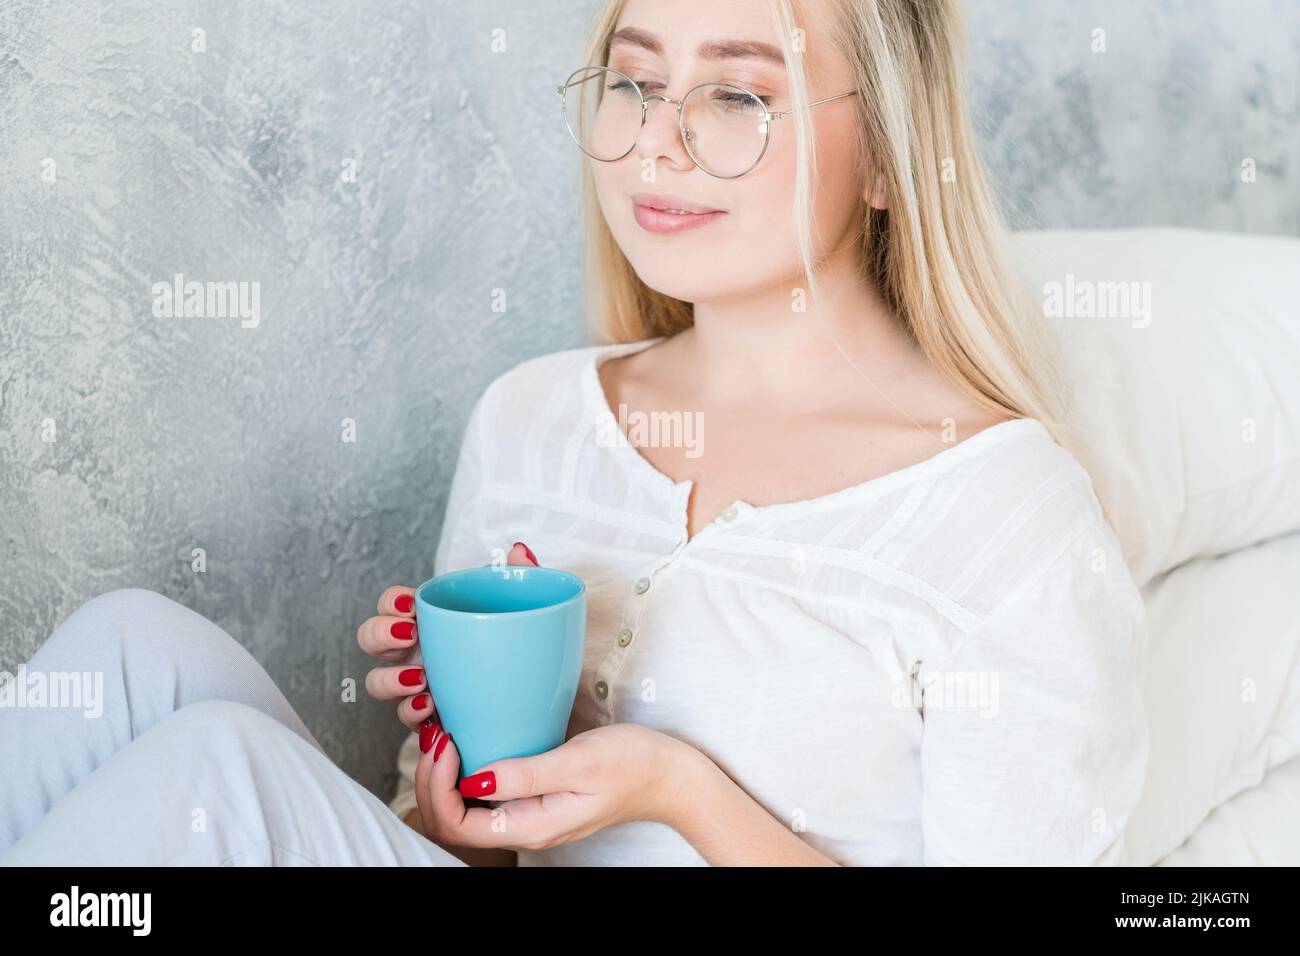 winter morning relaxation delighted lady hot drink Stock Photo